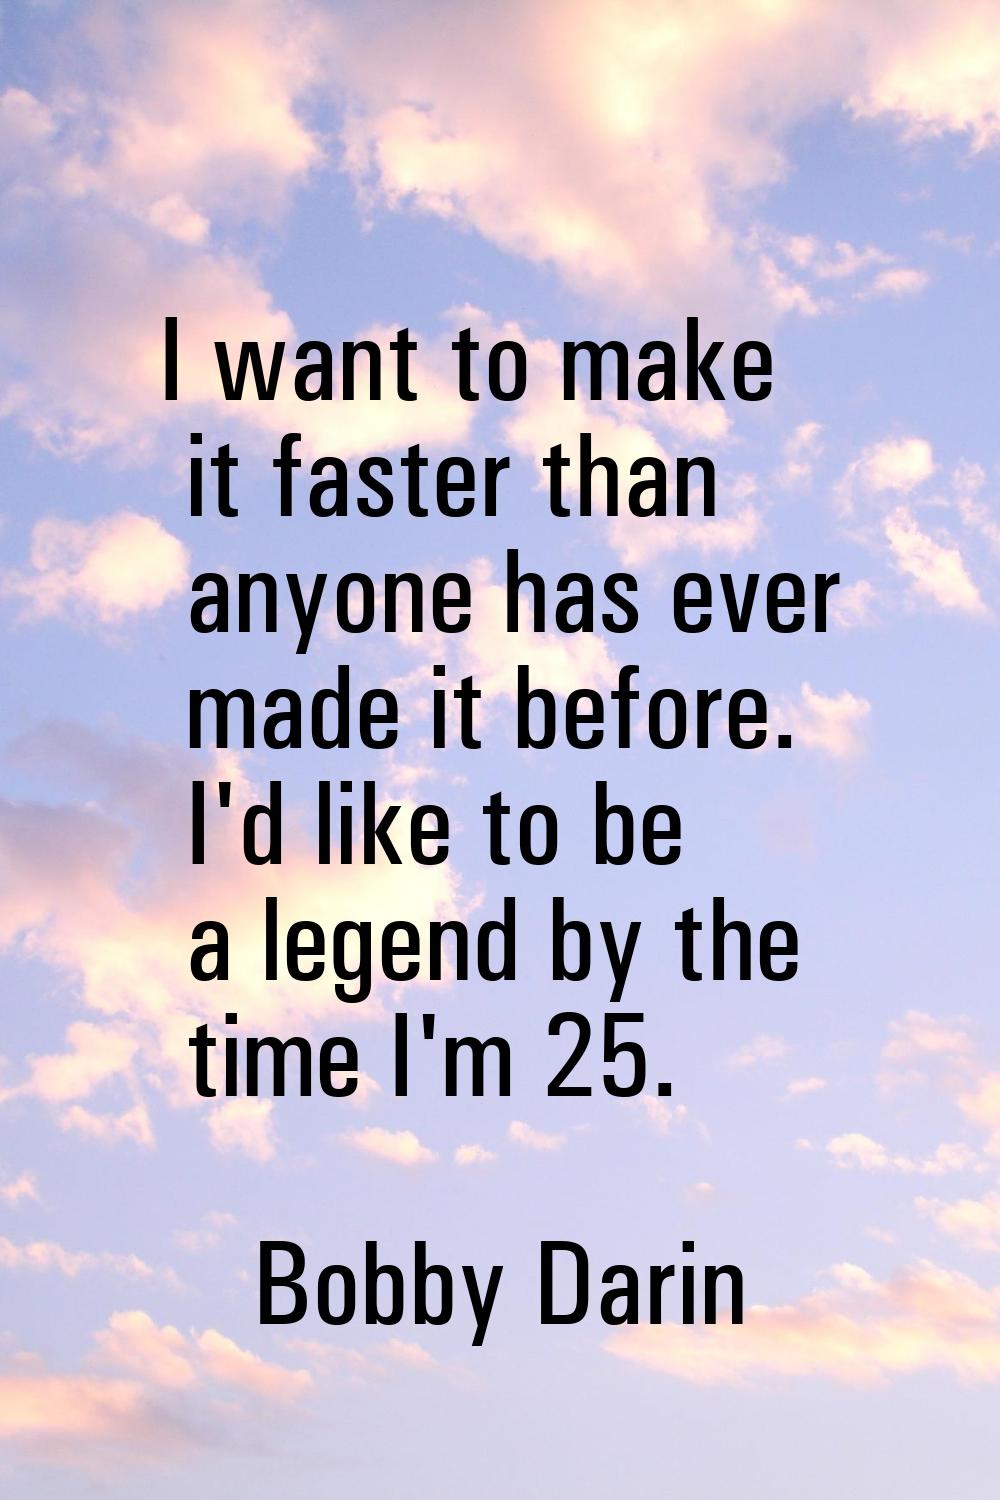 I want to make it faster than anyone has ever made it before. I'd like to be a legend by the time I